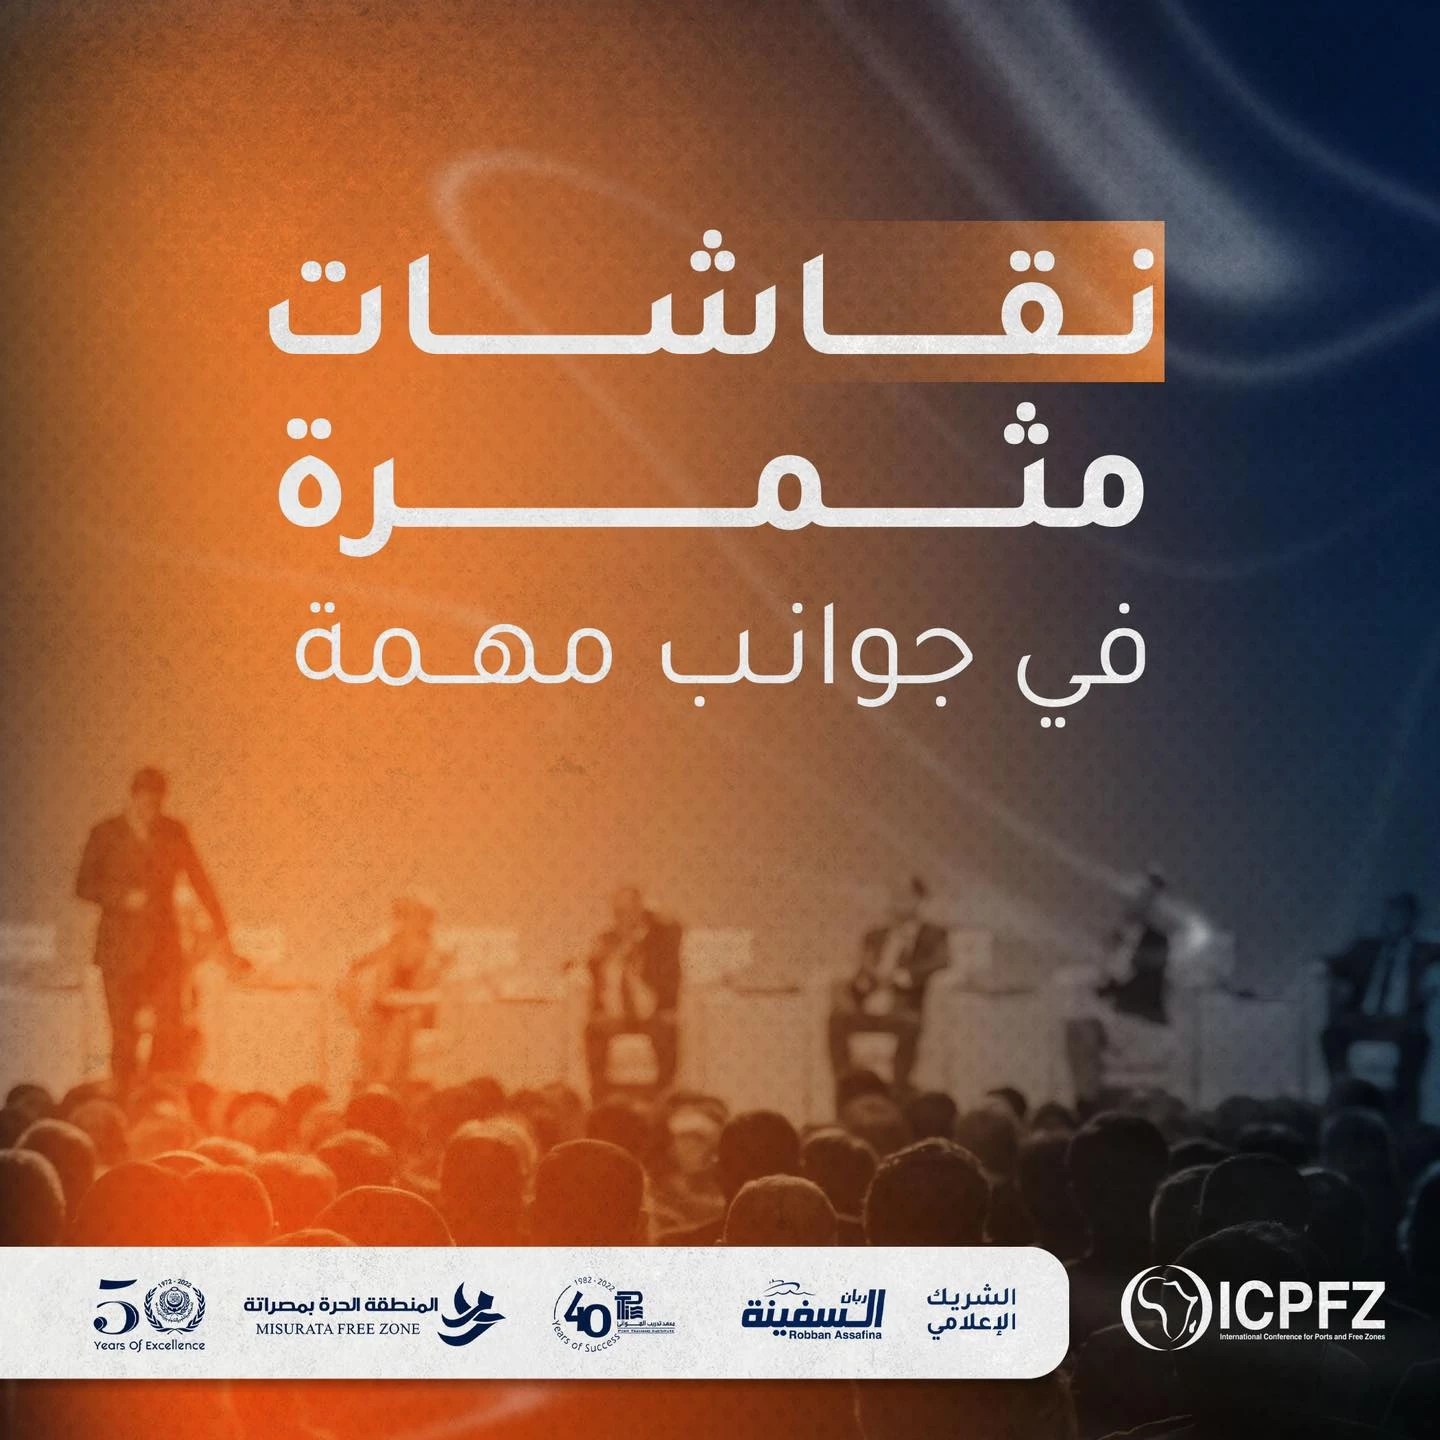 The International North African Ports and Free Zones Conference and Exhibition2